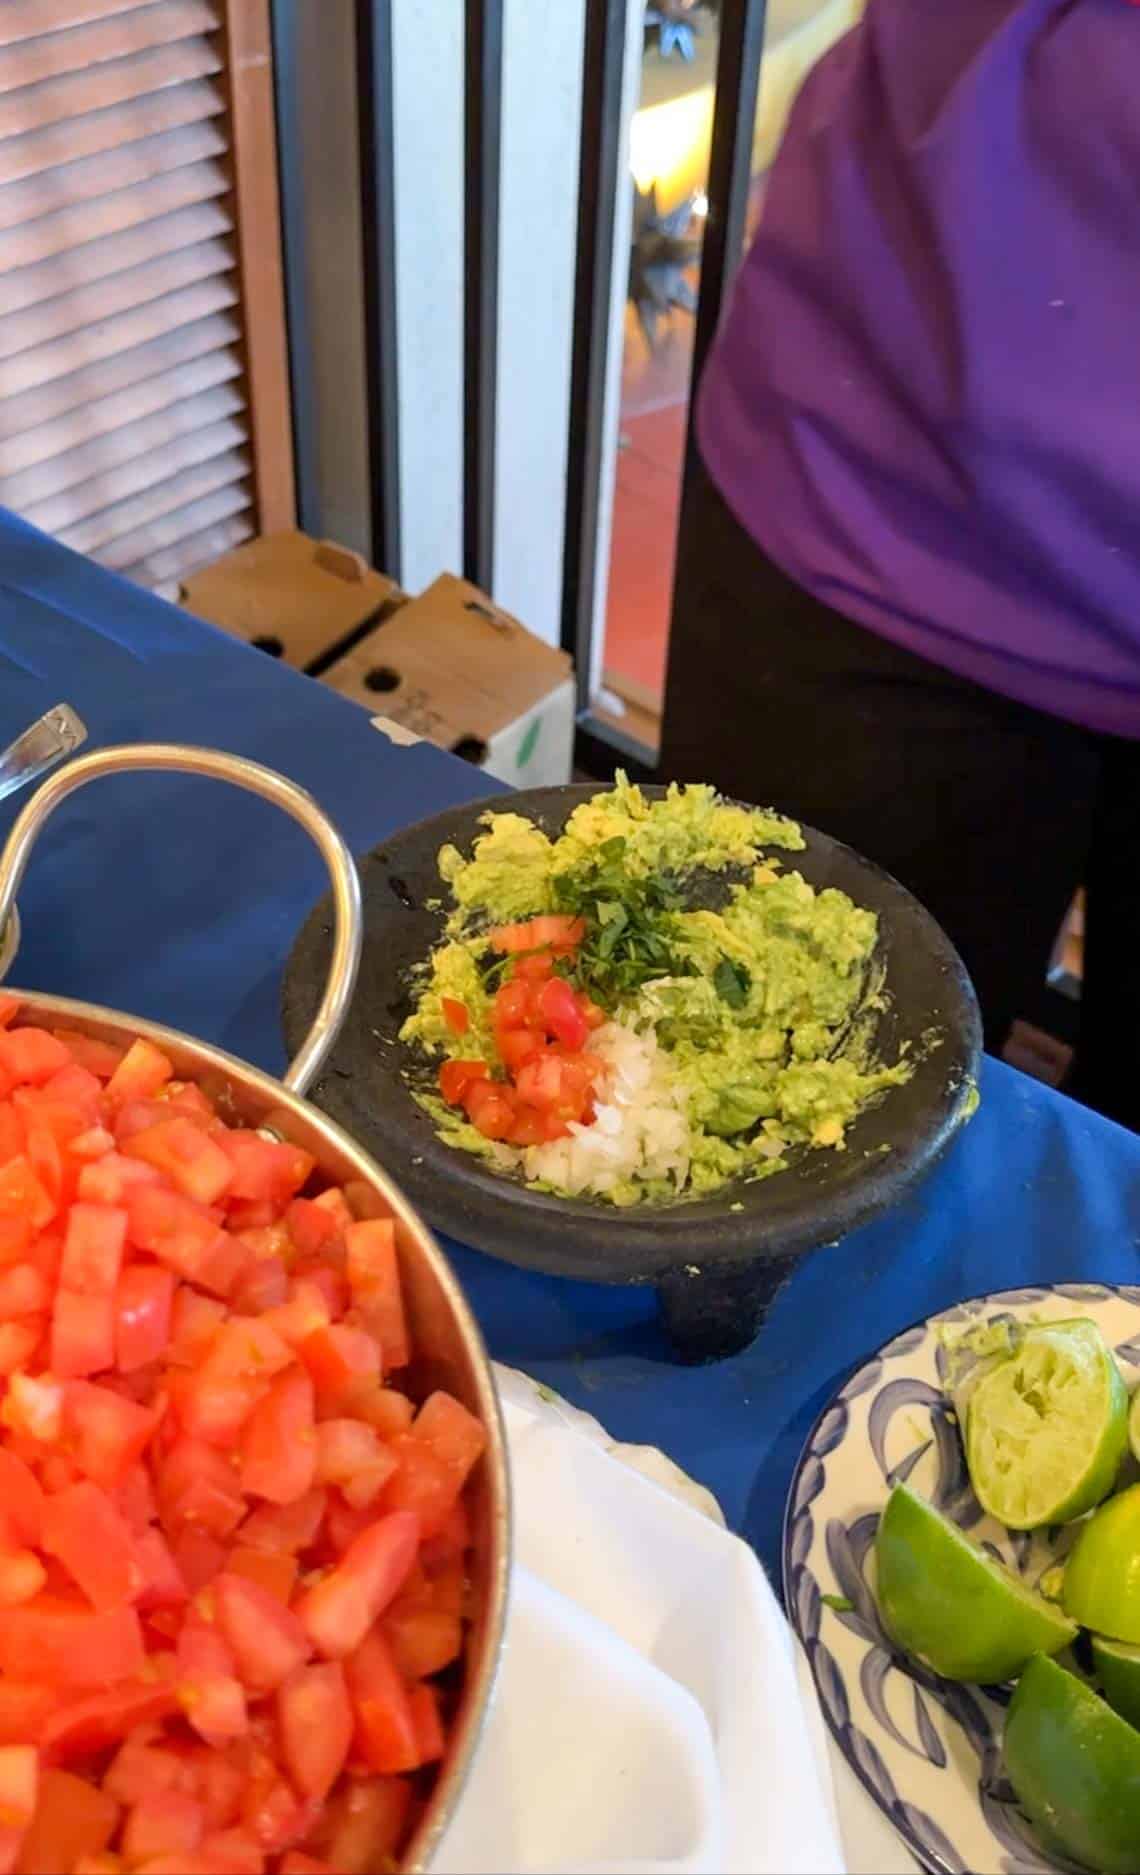 Mashed avocado topped with chopped onions, tomato and cilantro in a black bowl on a blue tablecloth.